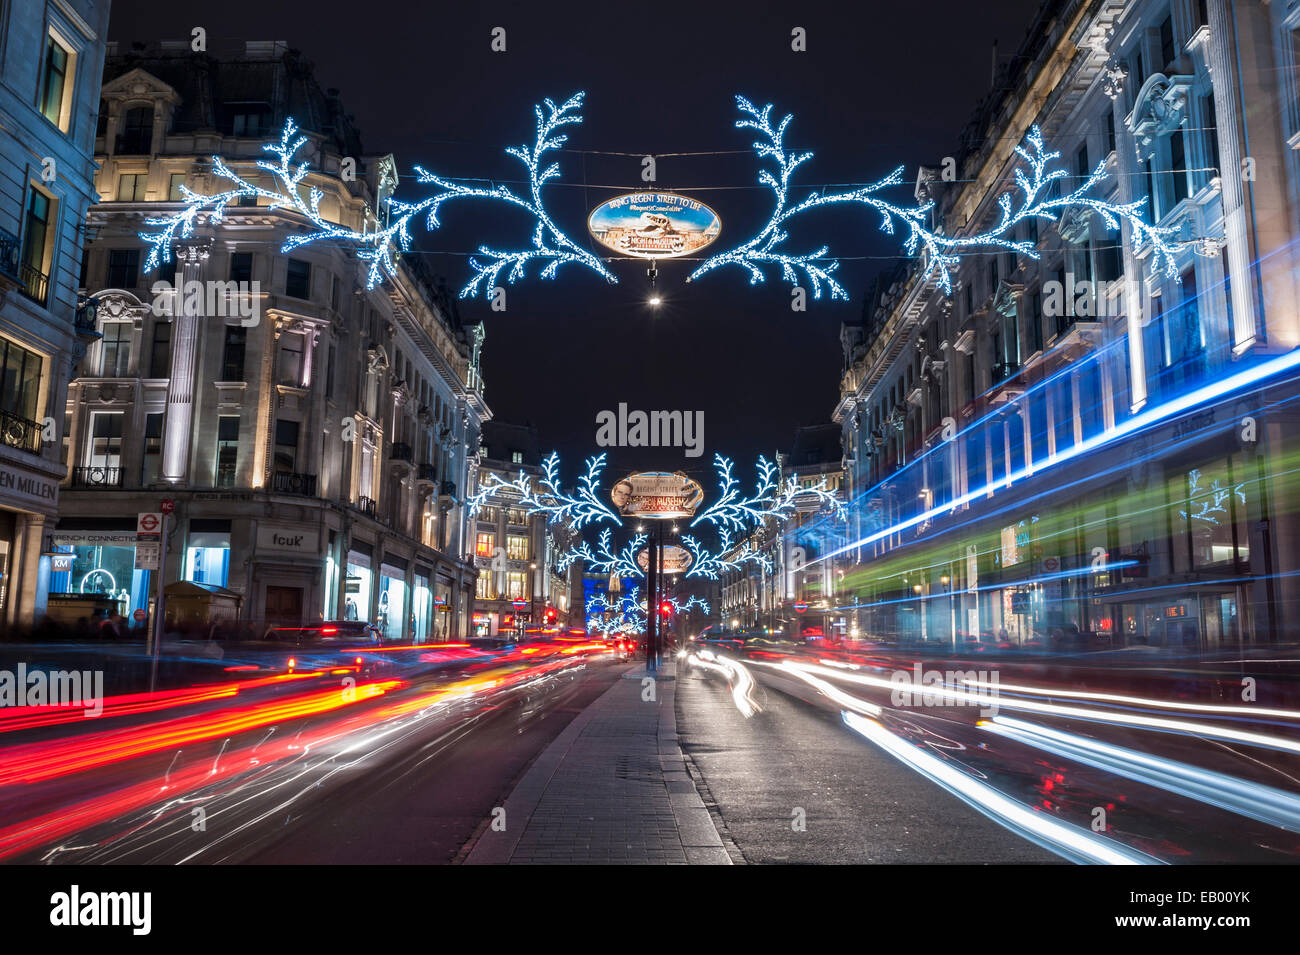 London, 22 November 2014. A long exposure produces light trails of passing  traffic down Regent Street. This year's Christmas lights promote the movie " Night at the Museum 2 - Secret of the